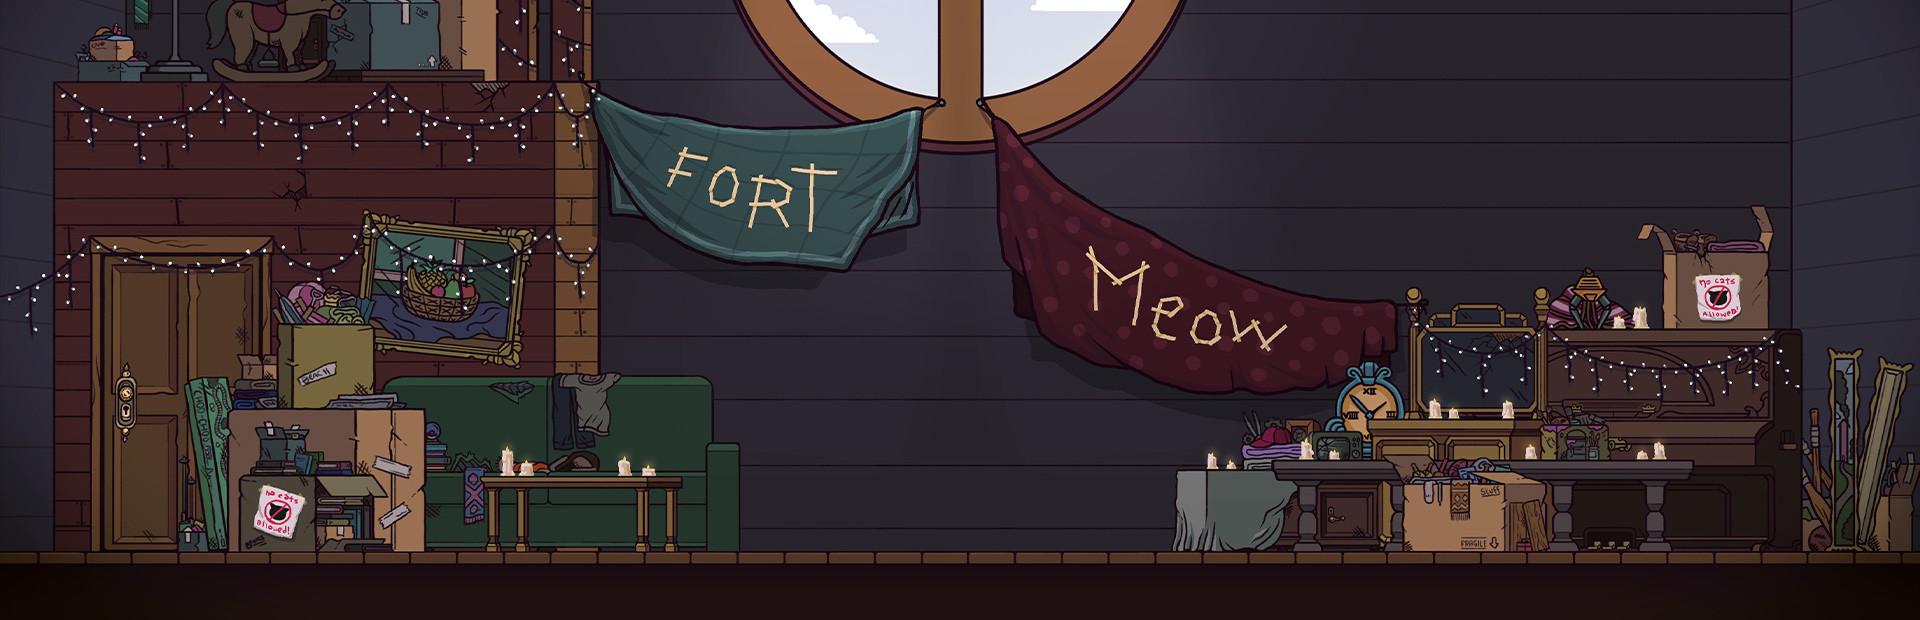 Fort Meow cover image